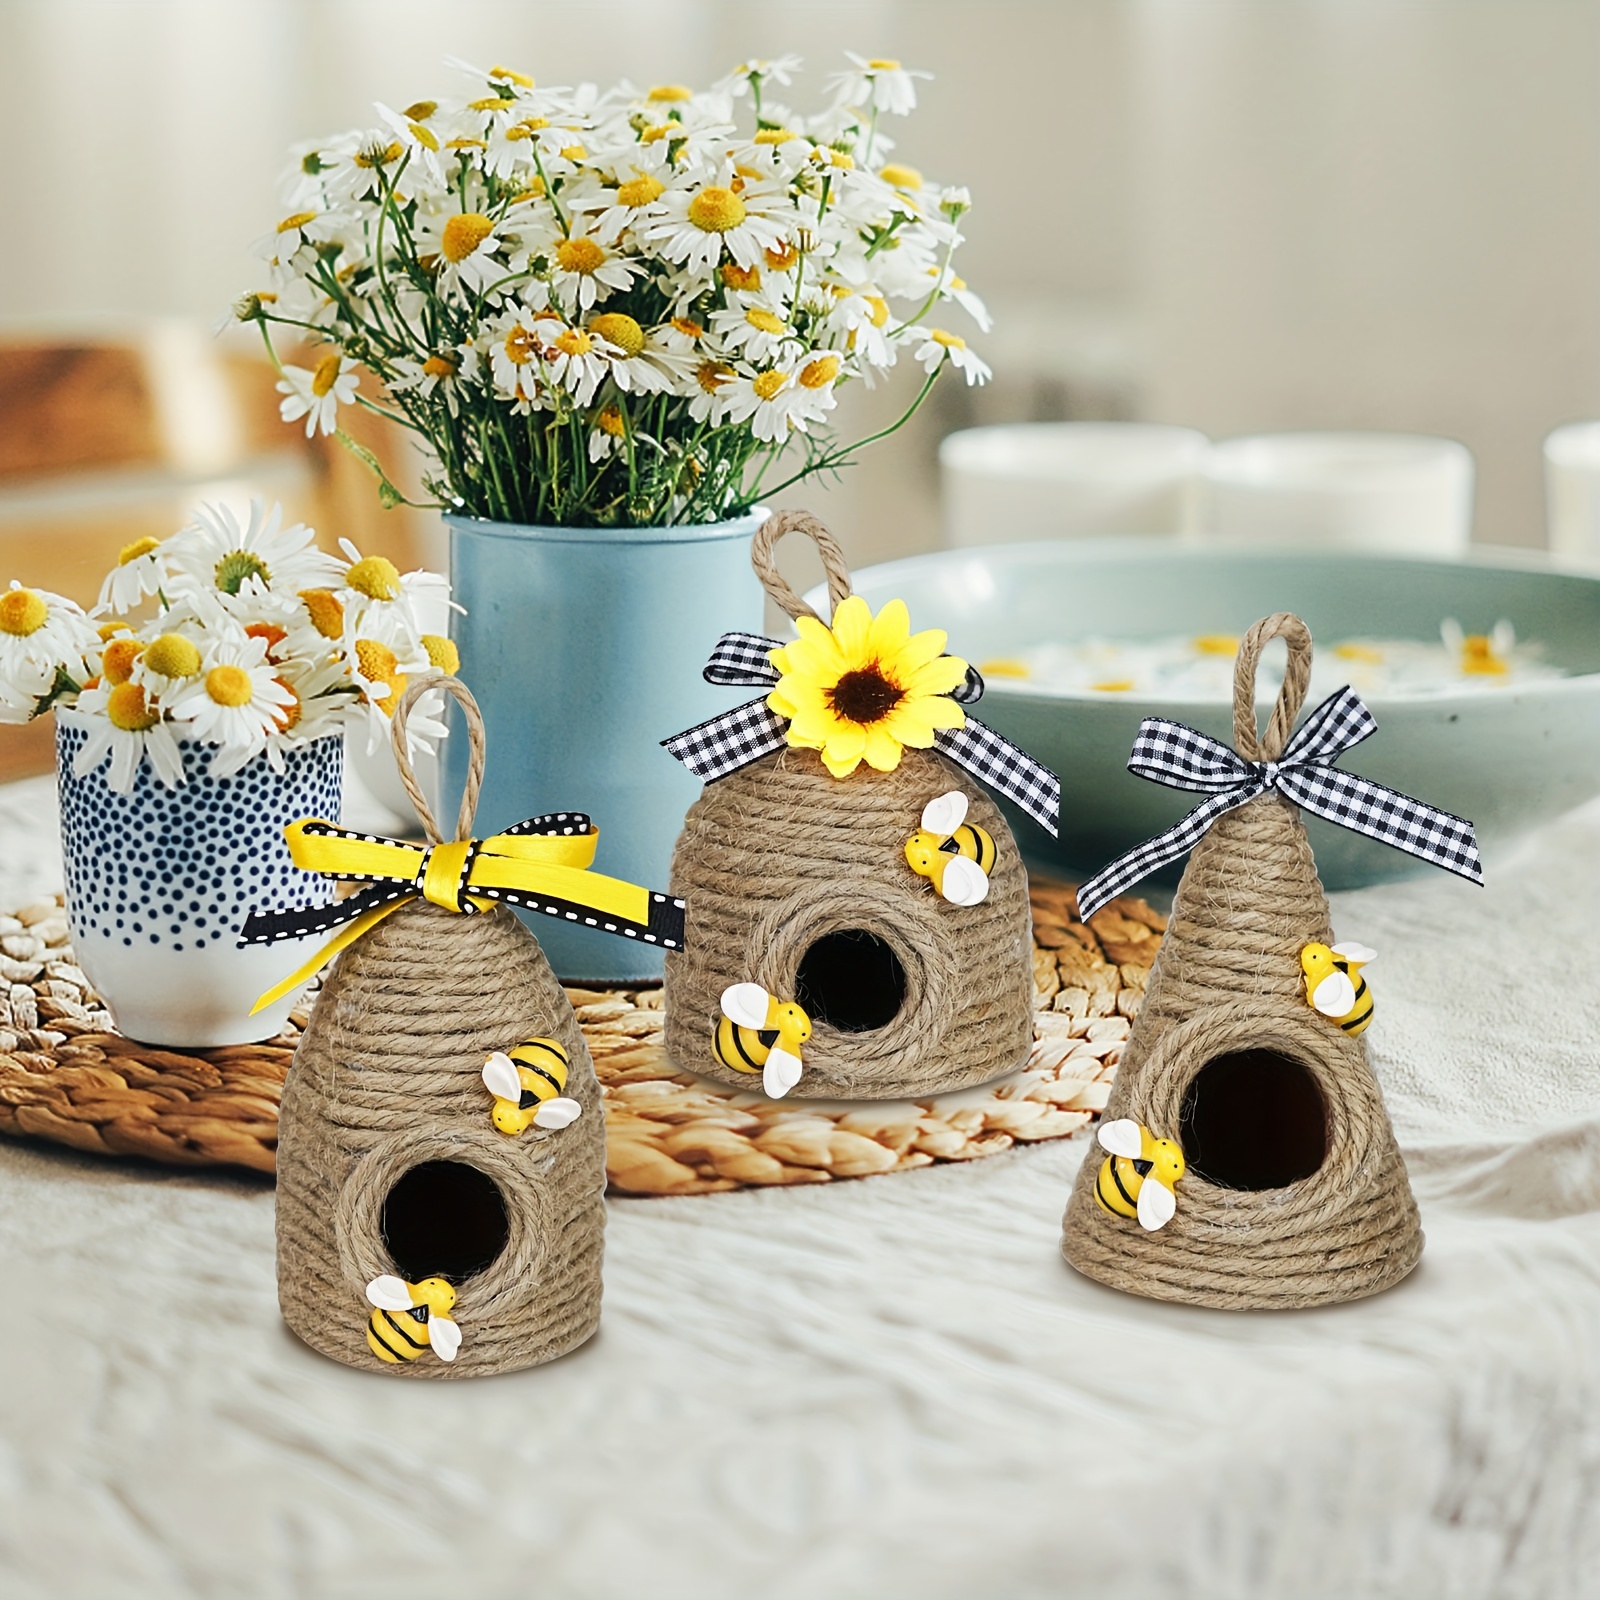 

3pcs Bee Hive Decor Bumble Bee Rustic Decor Hive, Natural Bee House, Bumble Bee Theme Party Decor Spring Summer Rustic Farmhouse Kitchen Table Tiered Tray Decor